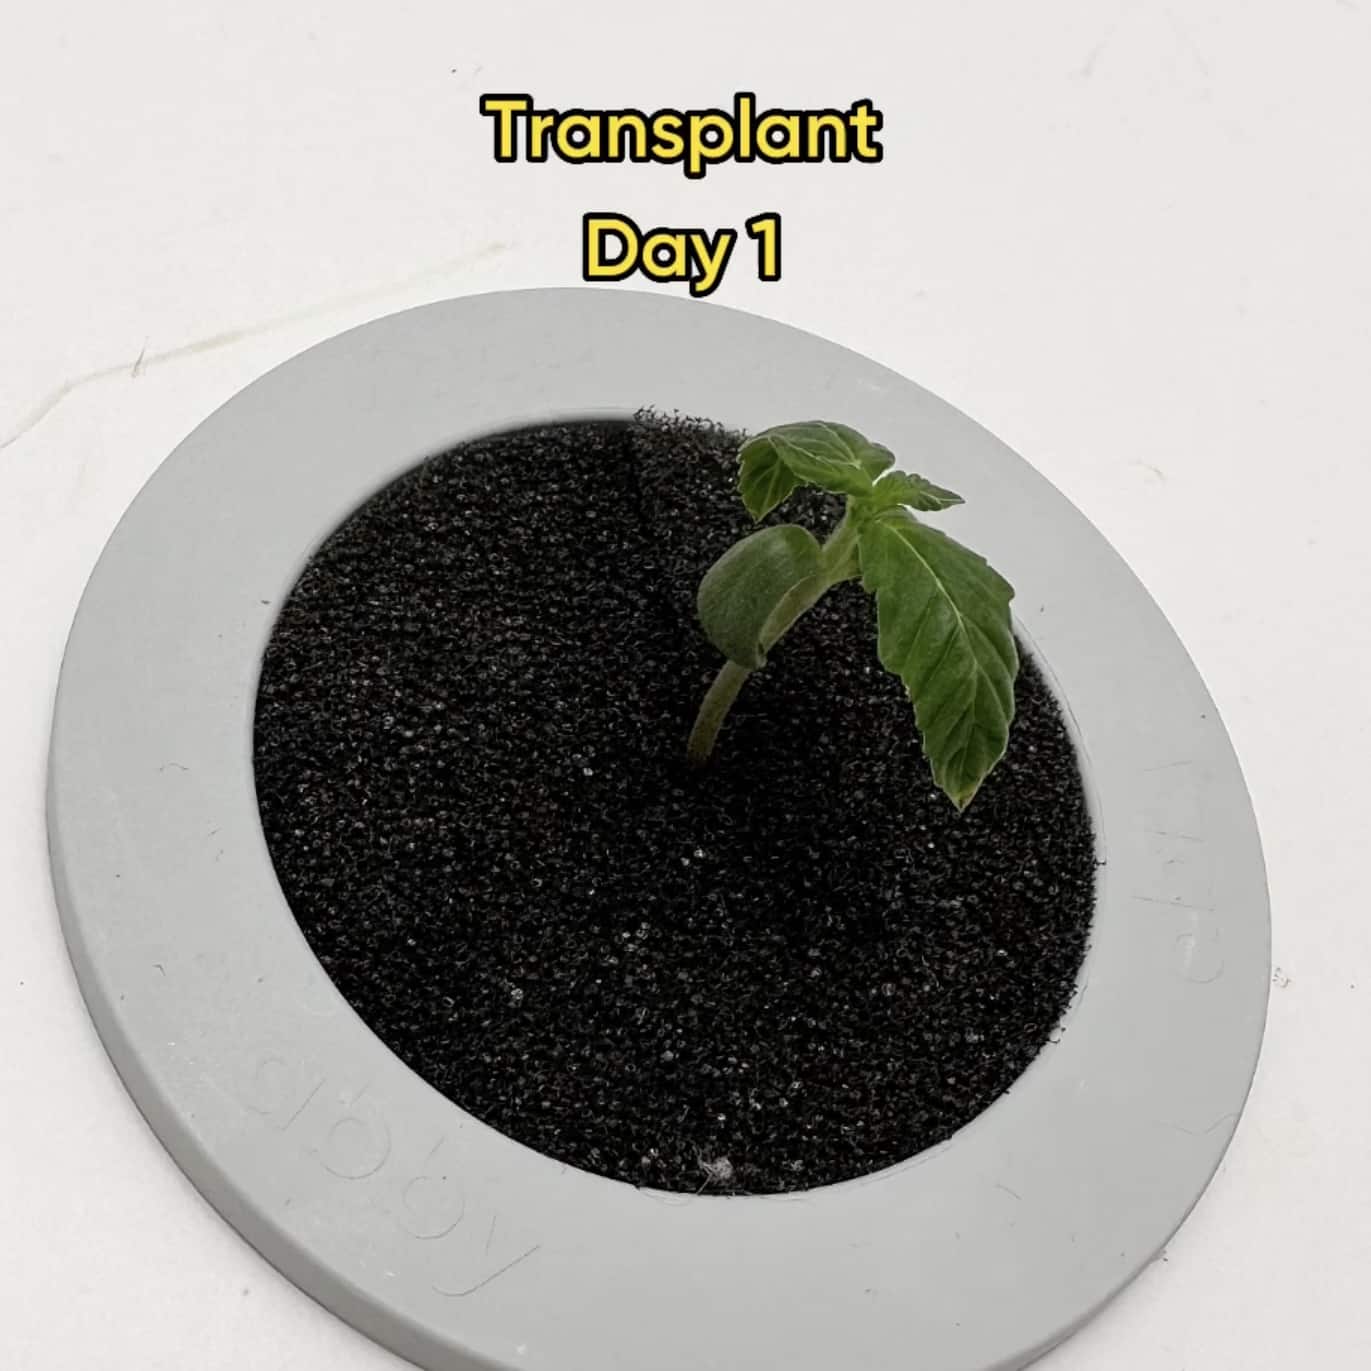 sprouted cannabis seed ready to transplant